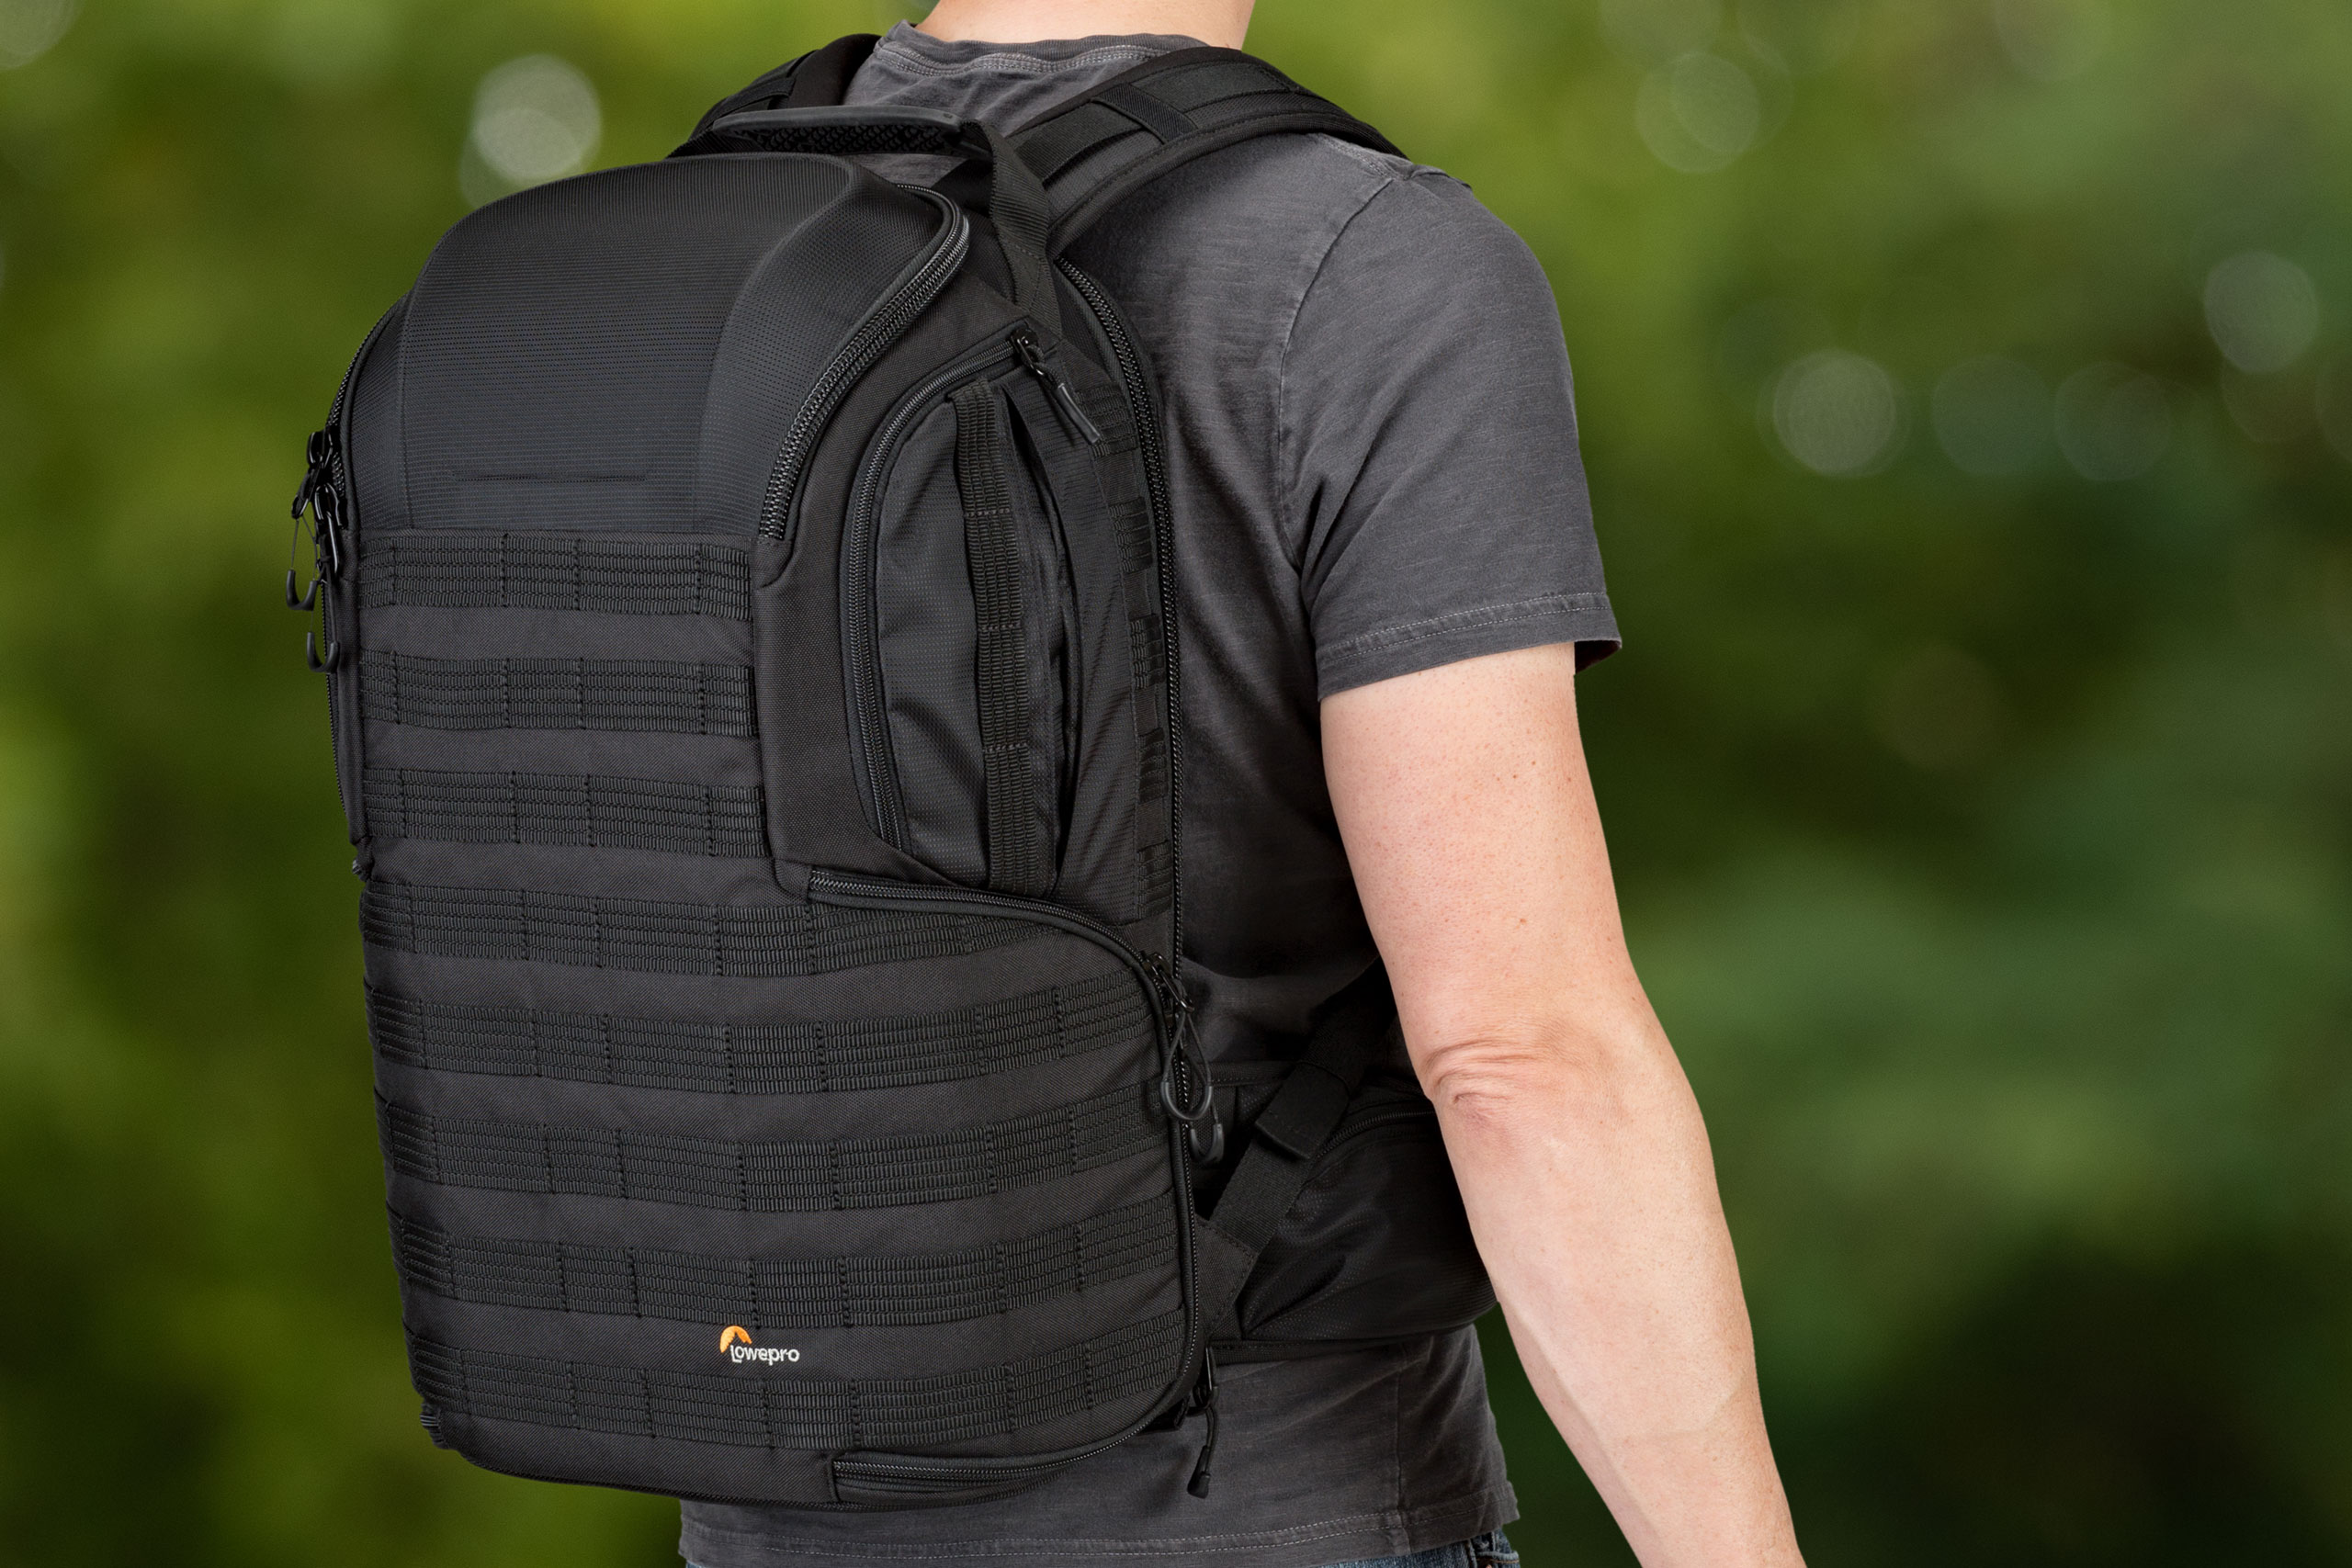 Lowepro ProTactic BP 450 AW II review - a stylish and robust